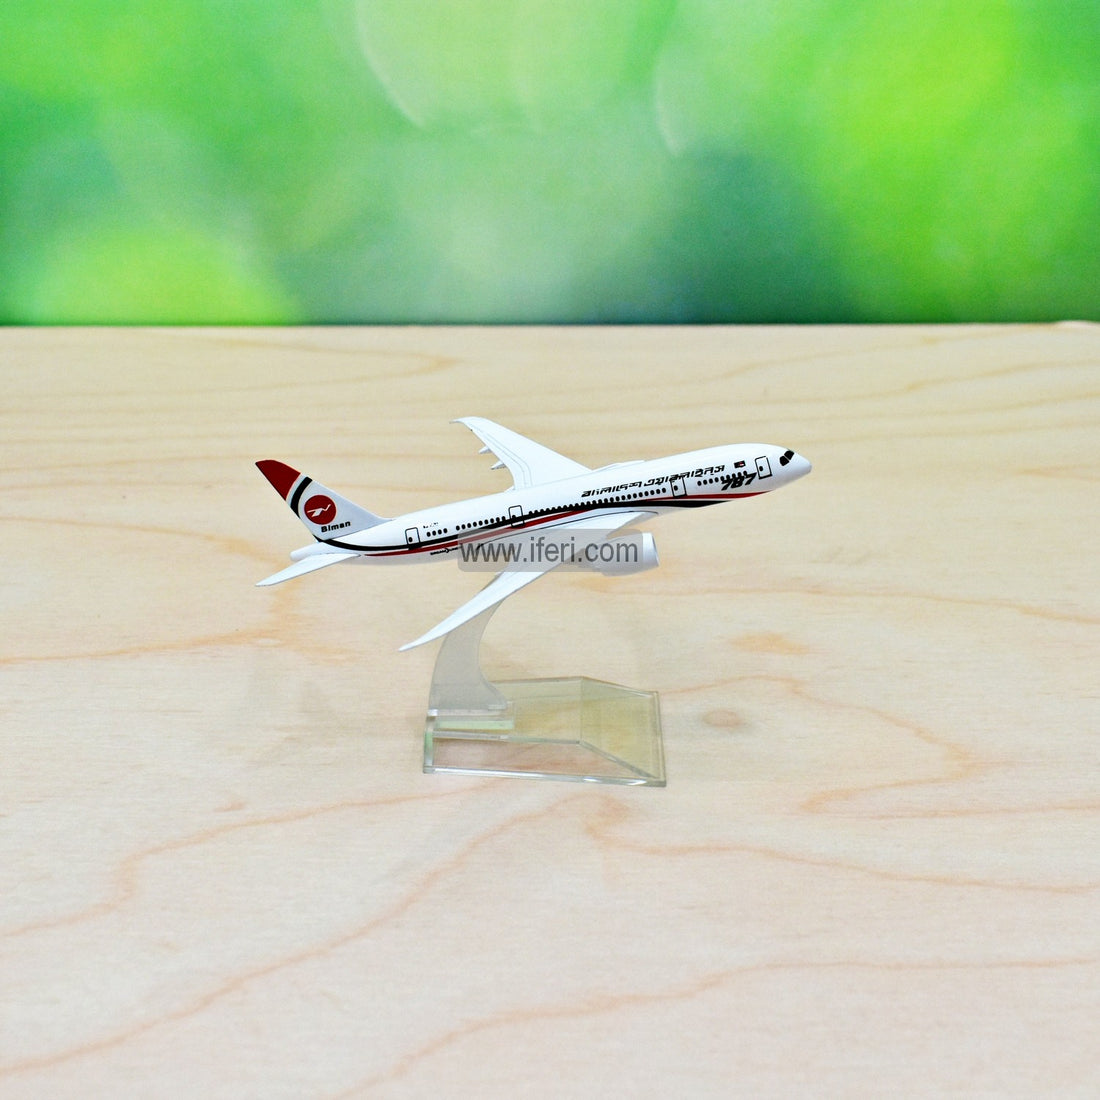 Buy Die Cast Metal Bangladesh Airlines Airplane Model Toy Showpiece with Base Online Through iferi.com from Bangladesh